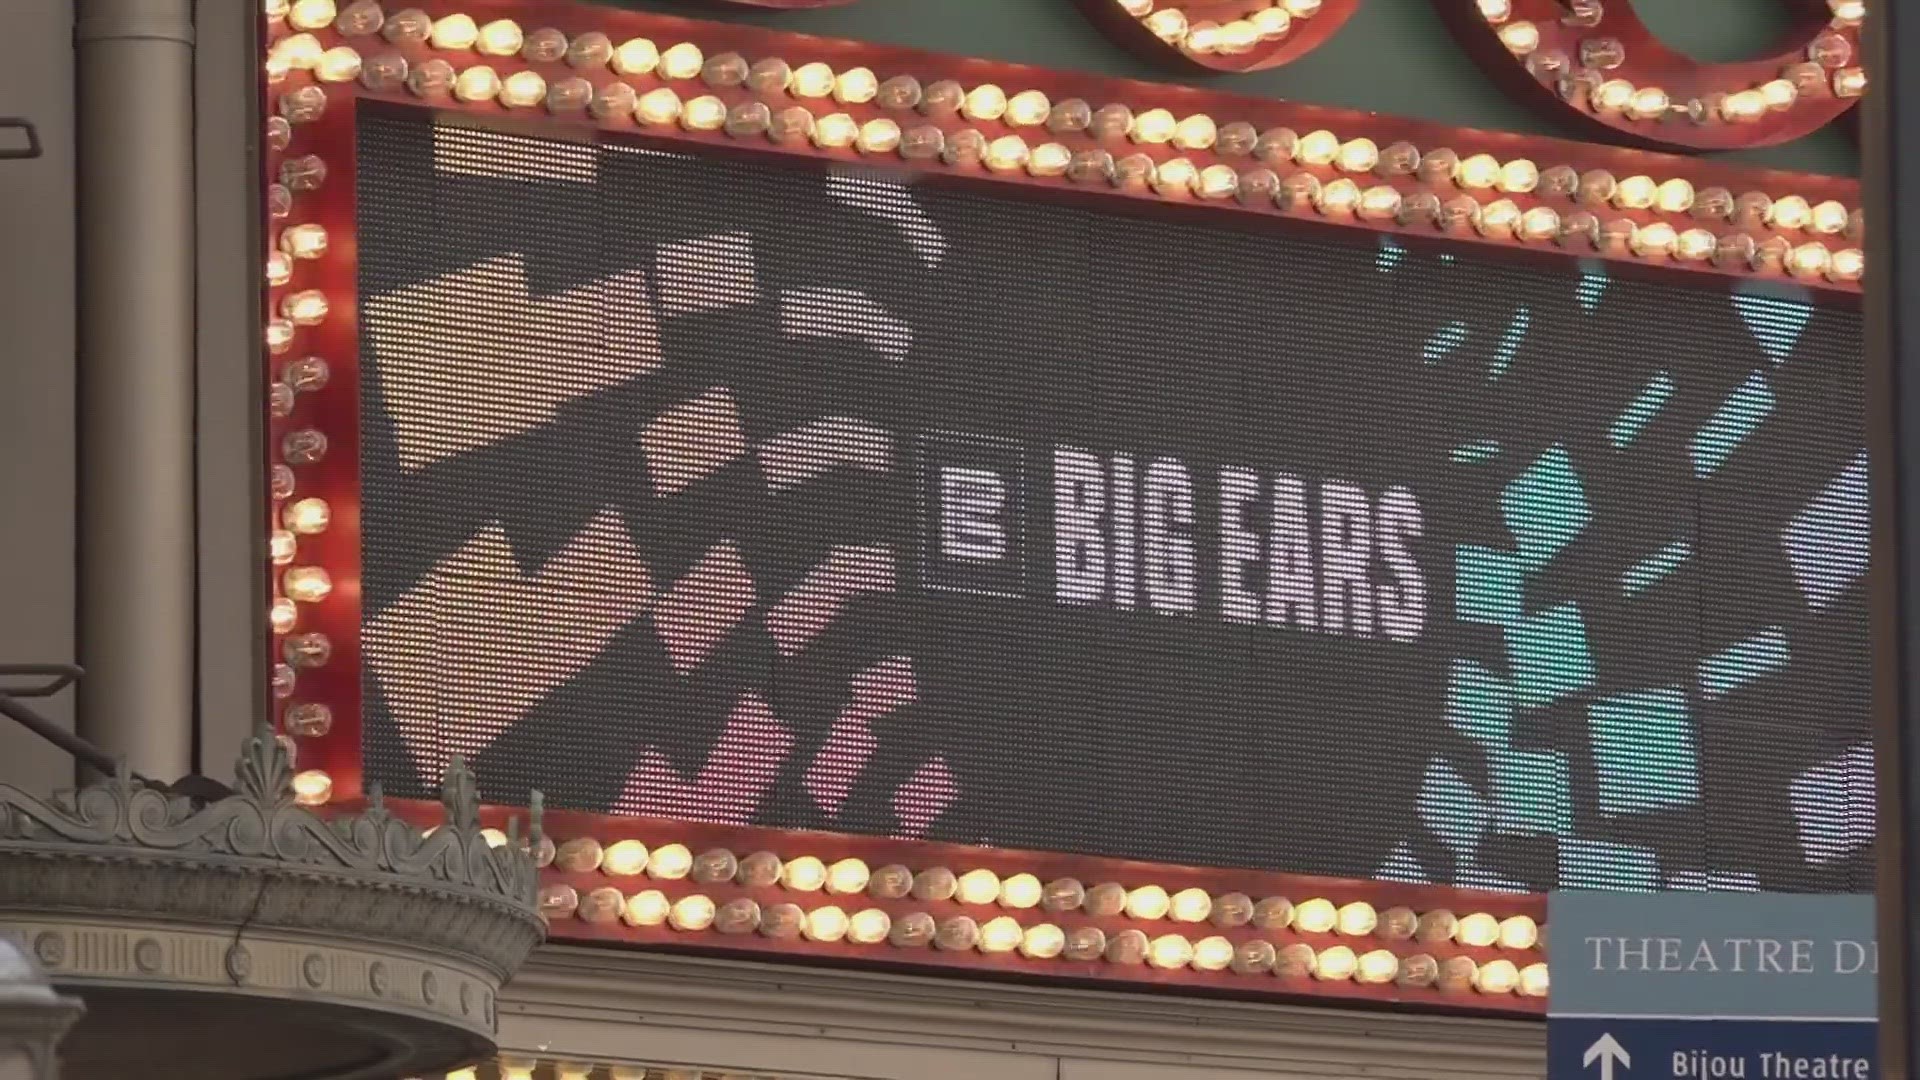 The Big Ears Festival is in town, and this year, more than 7,000 people came out to enjoy the music.